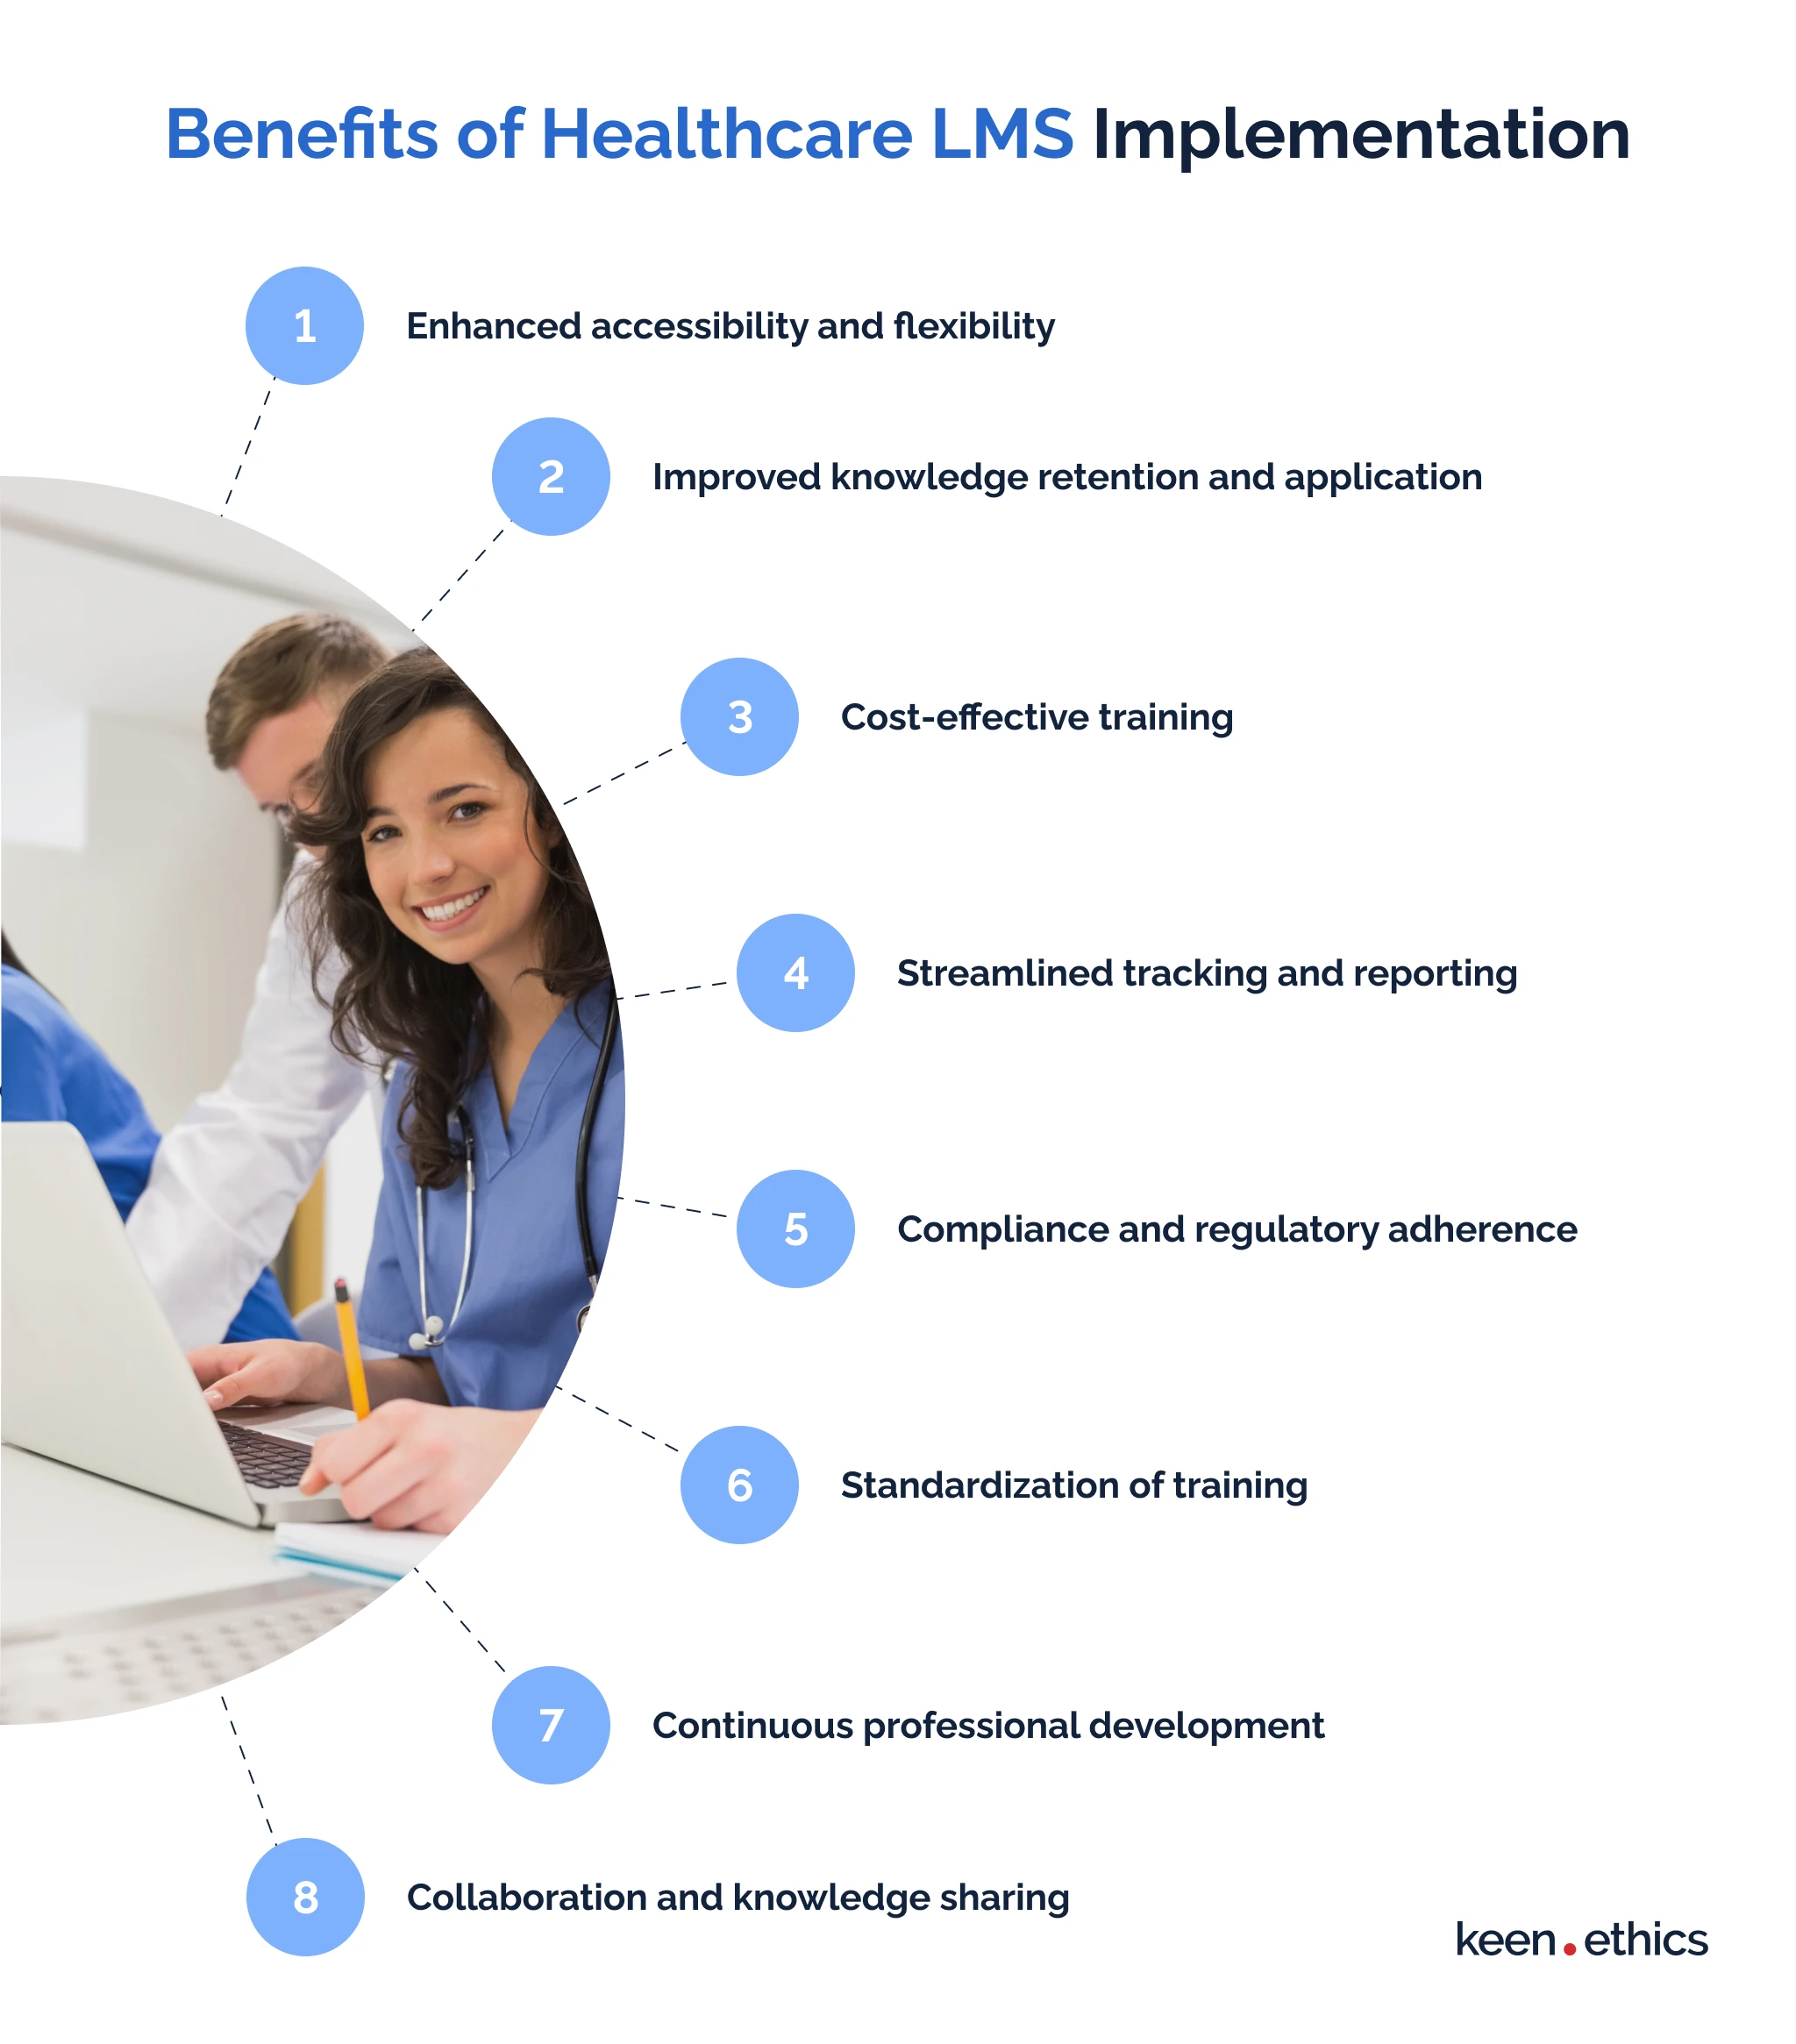 Benefits of healthcare LMS implementation